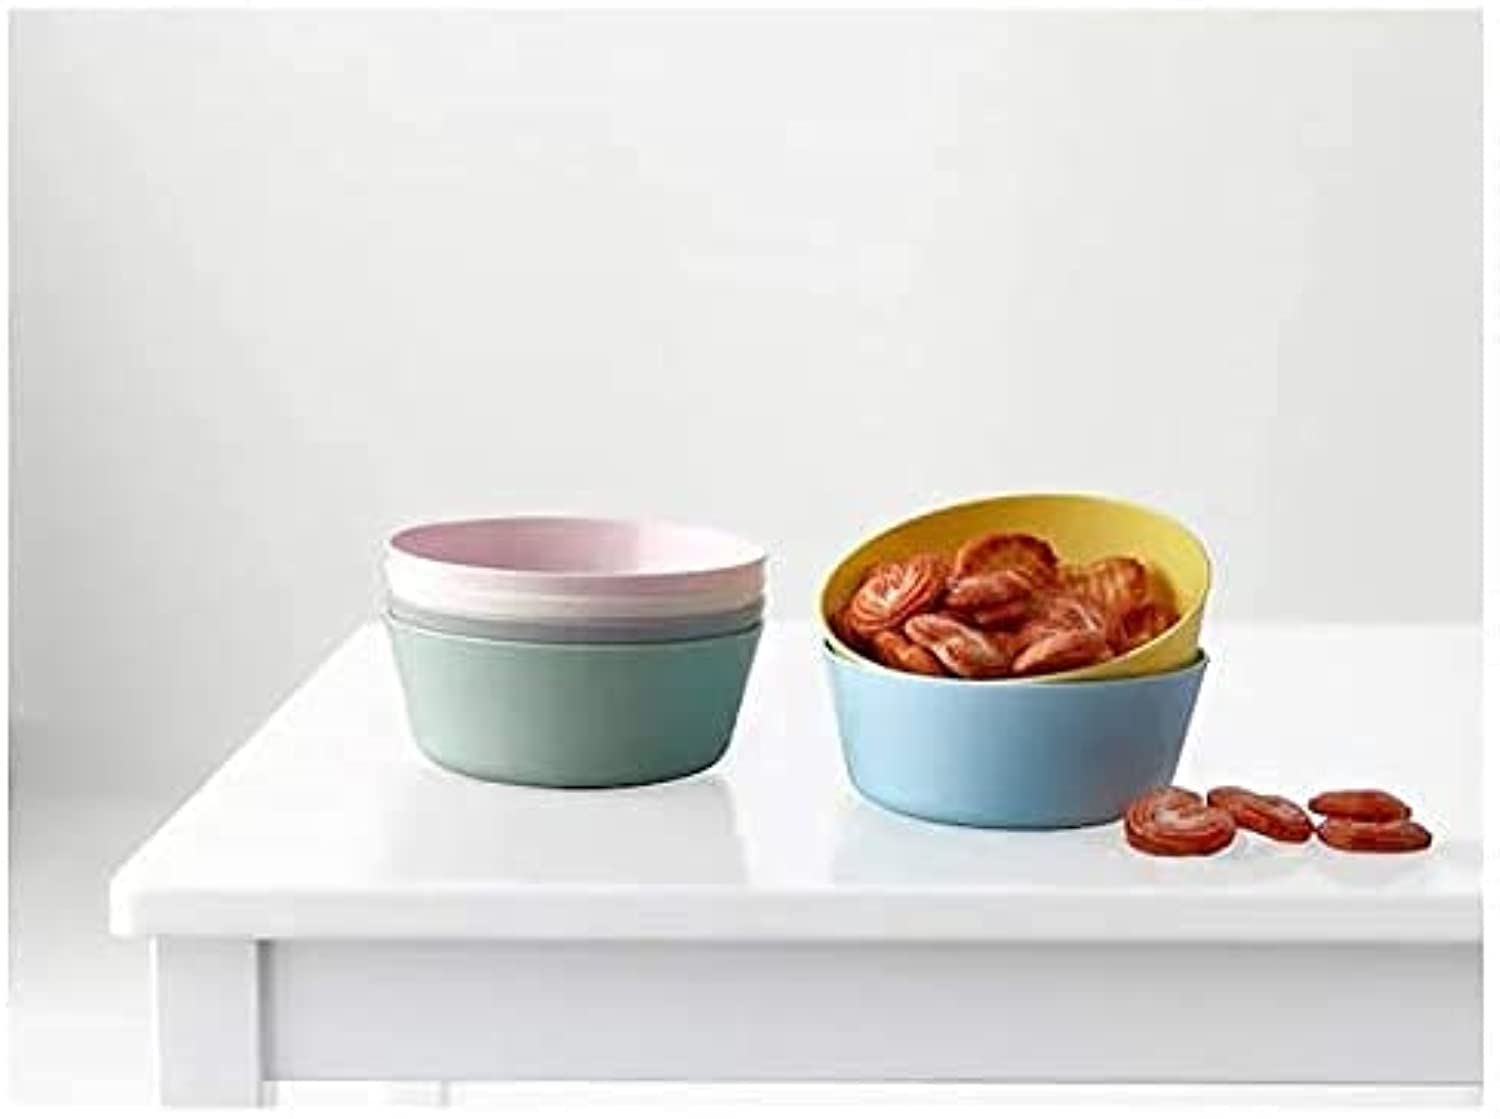 6 Bowls Mixed Colors for Kids by IKEA (KALAS Bowl) Best for Birthday Parties and Learning How to EAT Unbreakable Bowls